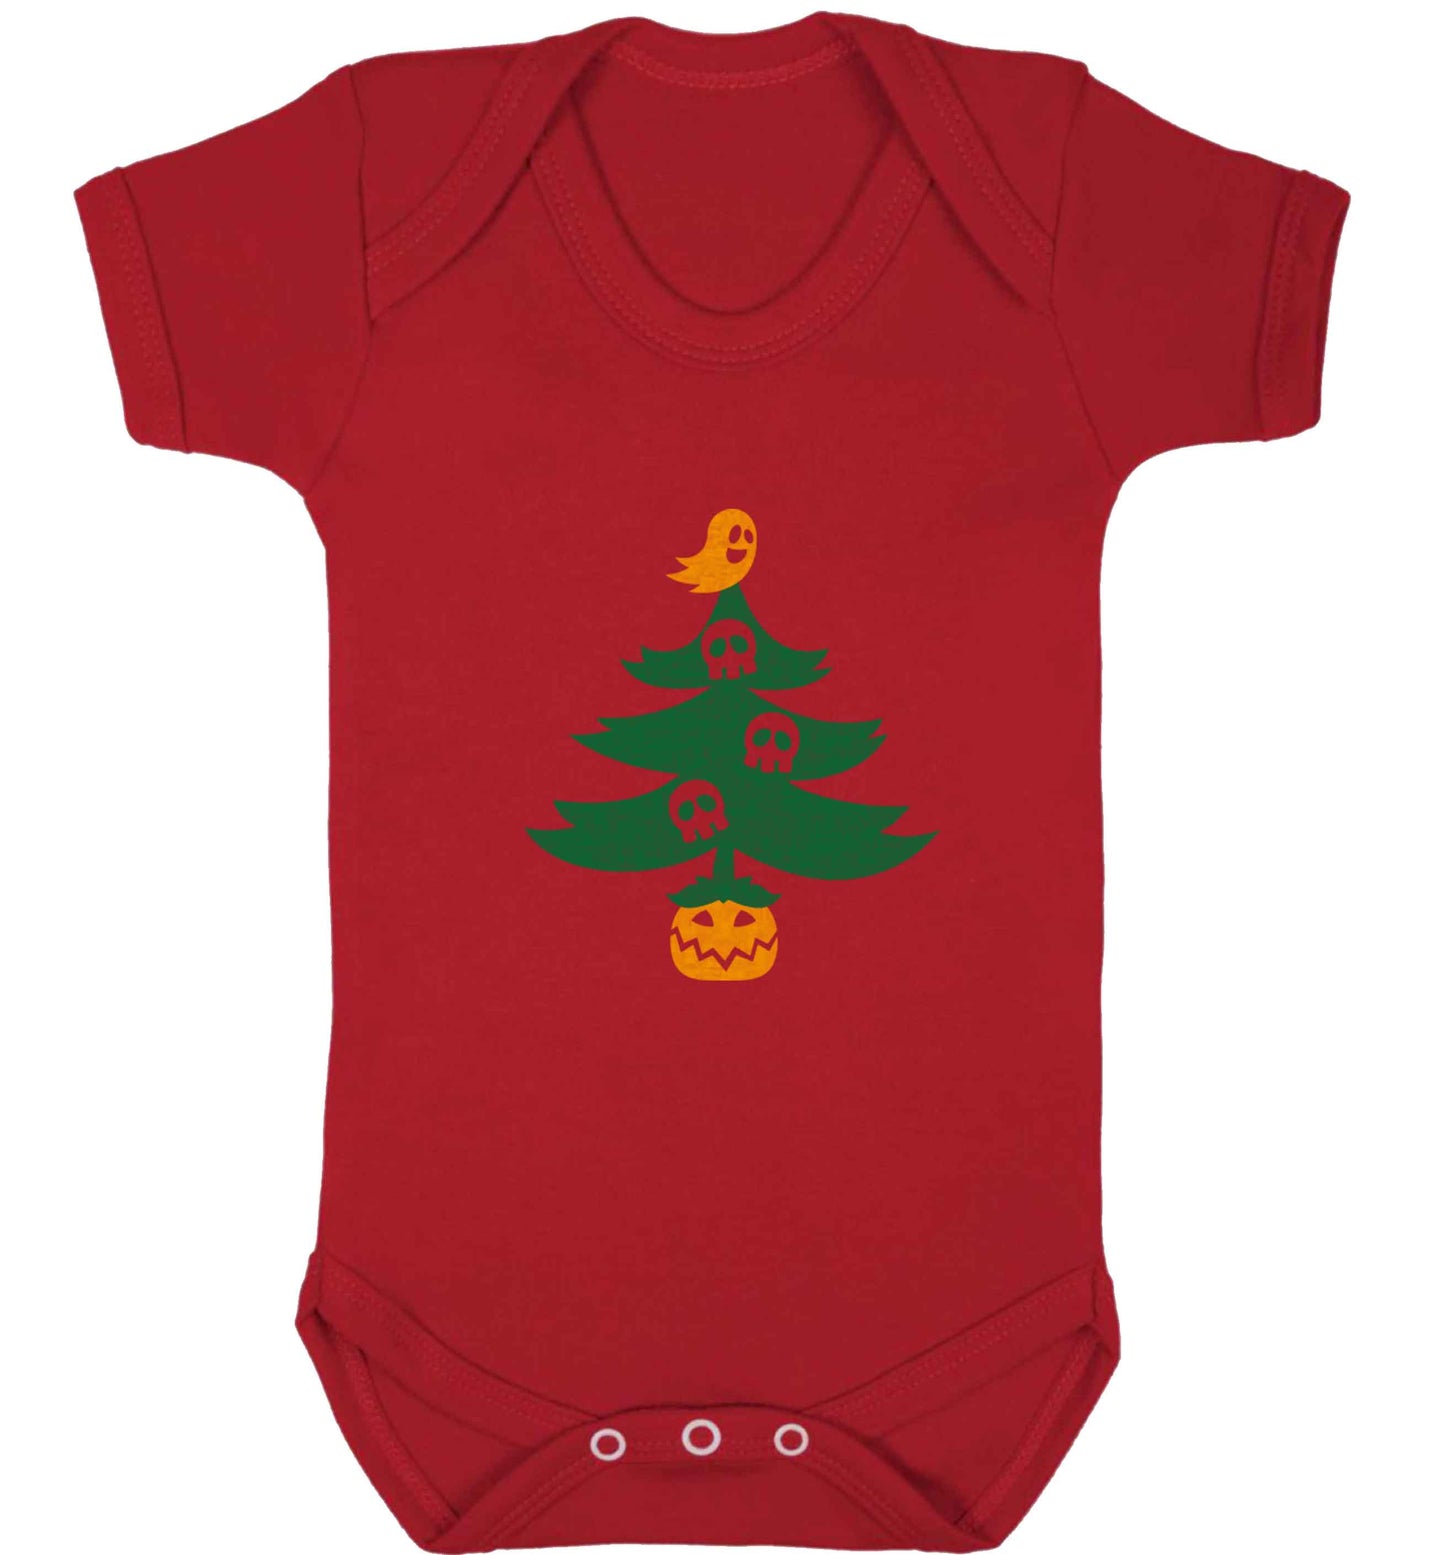 Halloween Christmas tree baby vest red 18-24 months